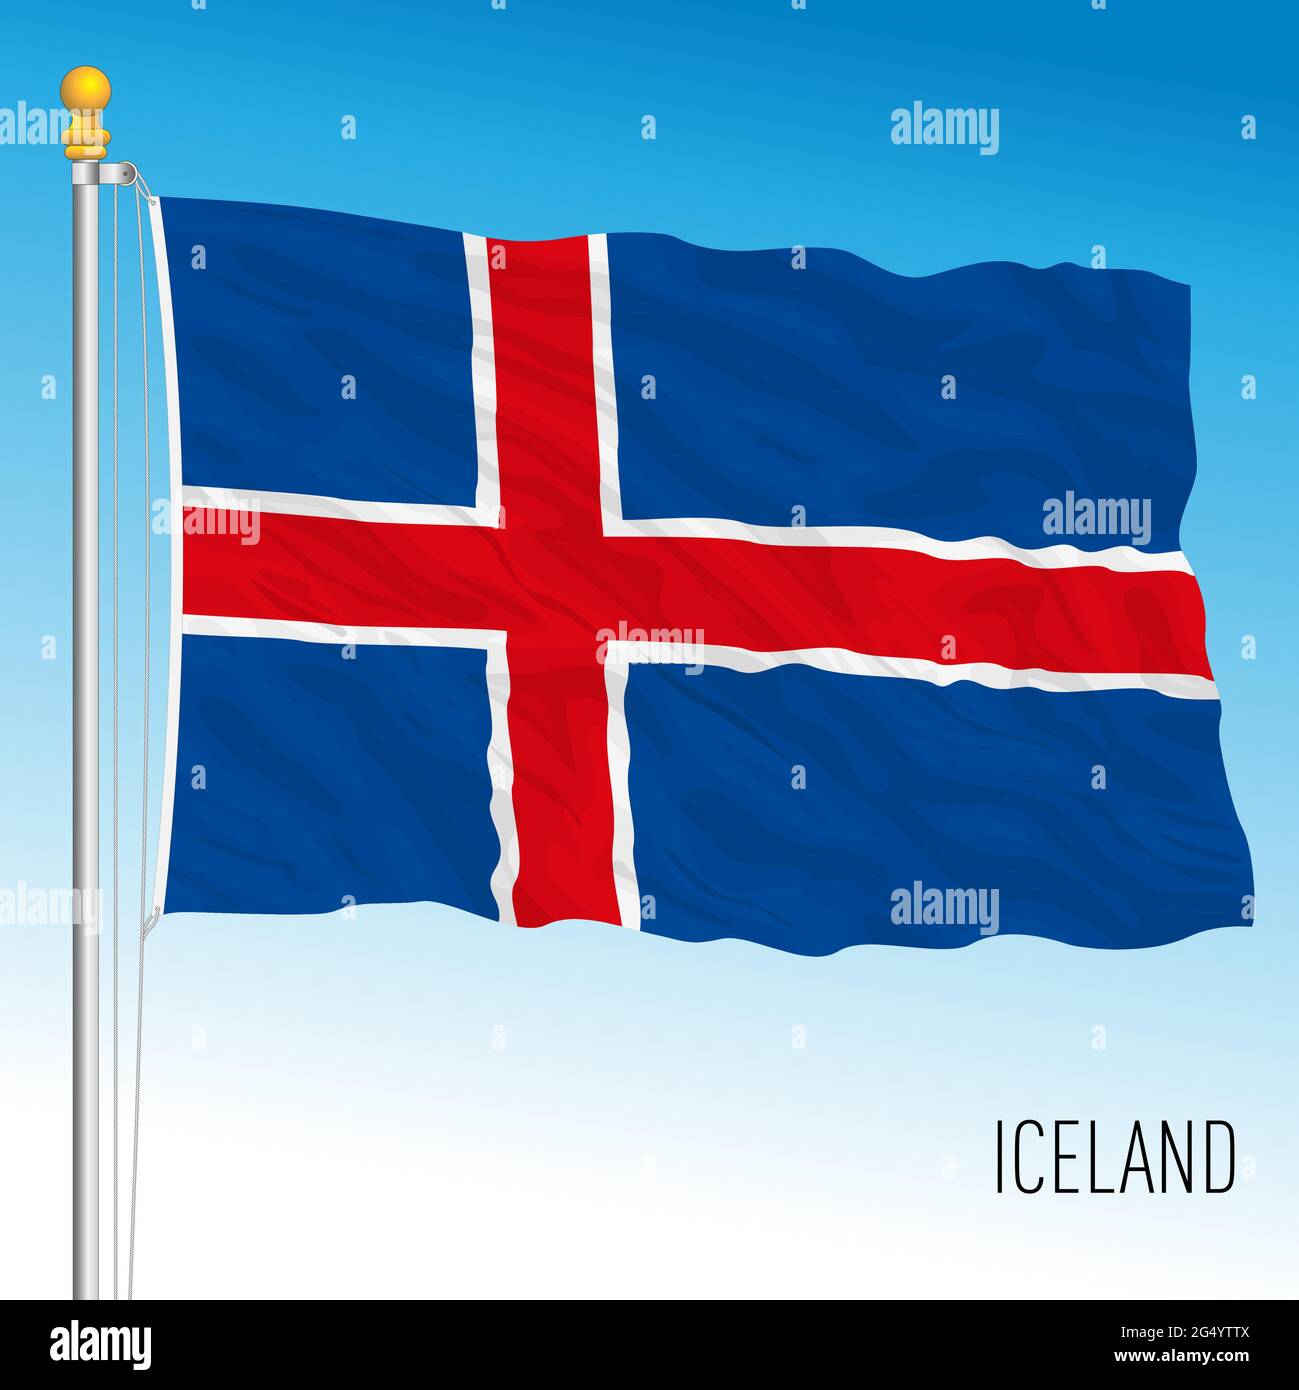 Iceland official national flag, north european country, vector illustration Stock Vector